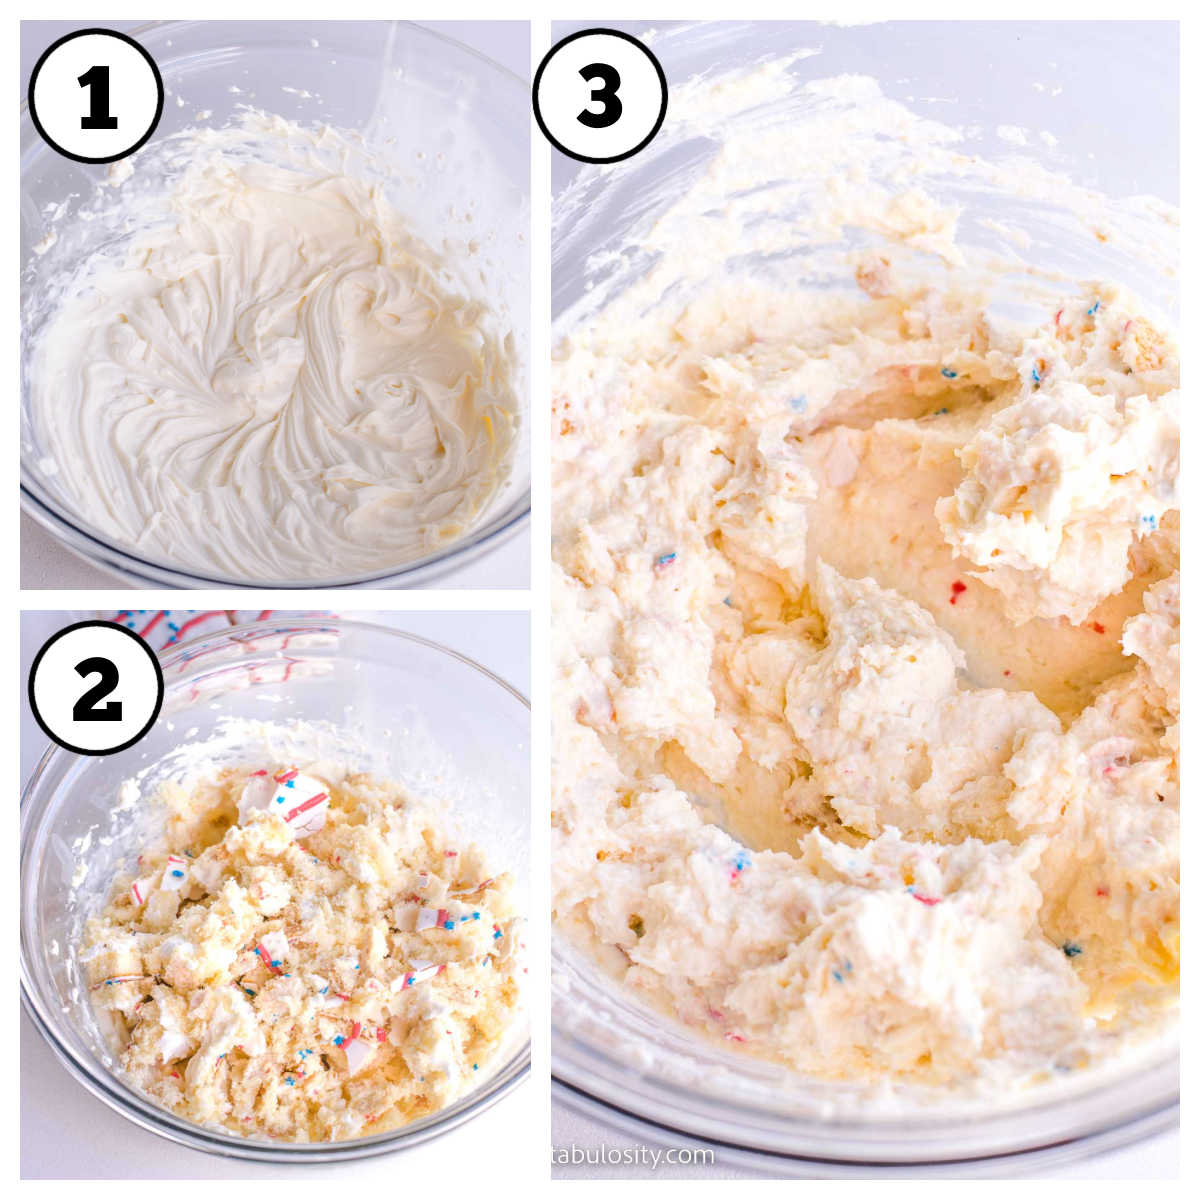 Steps 1-3 of how to make red white and blue dip.